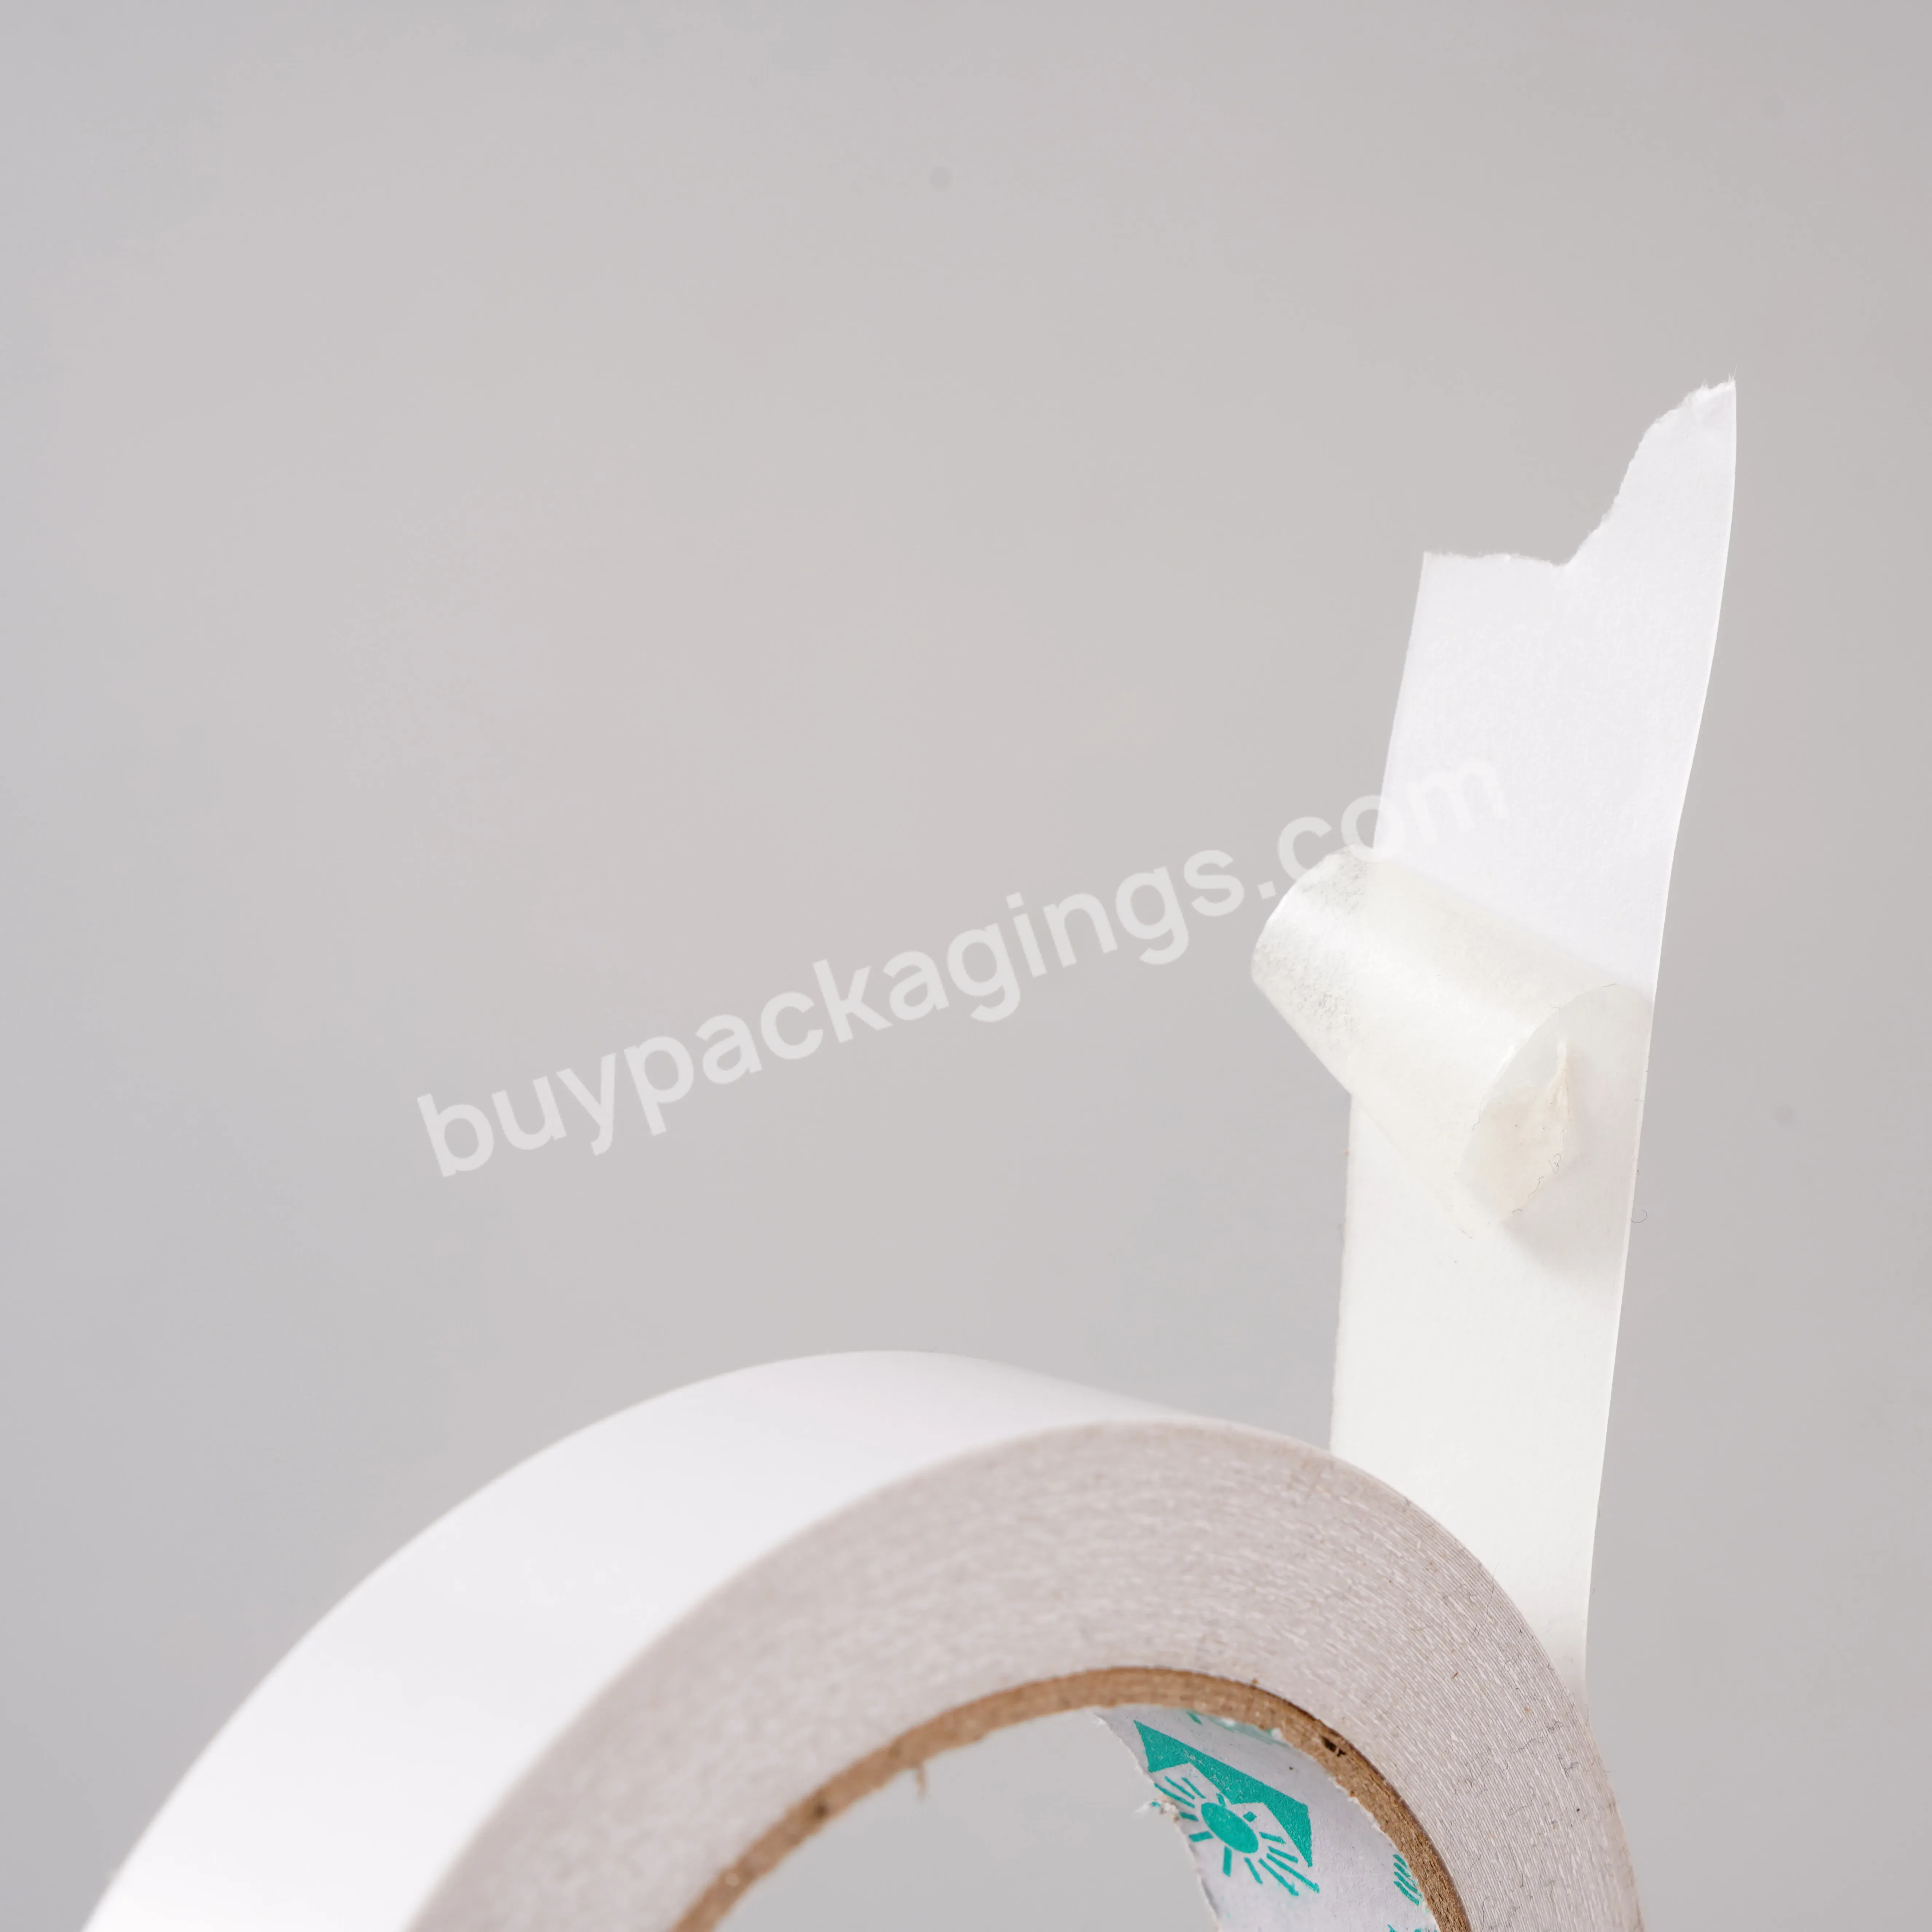 Fixed Transparent Learning Manual Stationery Office Tape White Double-sided Tape - Buy Double-sided Film Tape,Super Strong Sticky Woodworking Tape,Transparent Adhesive Thin Film.